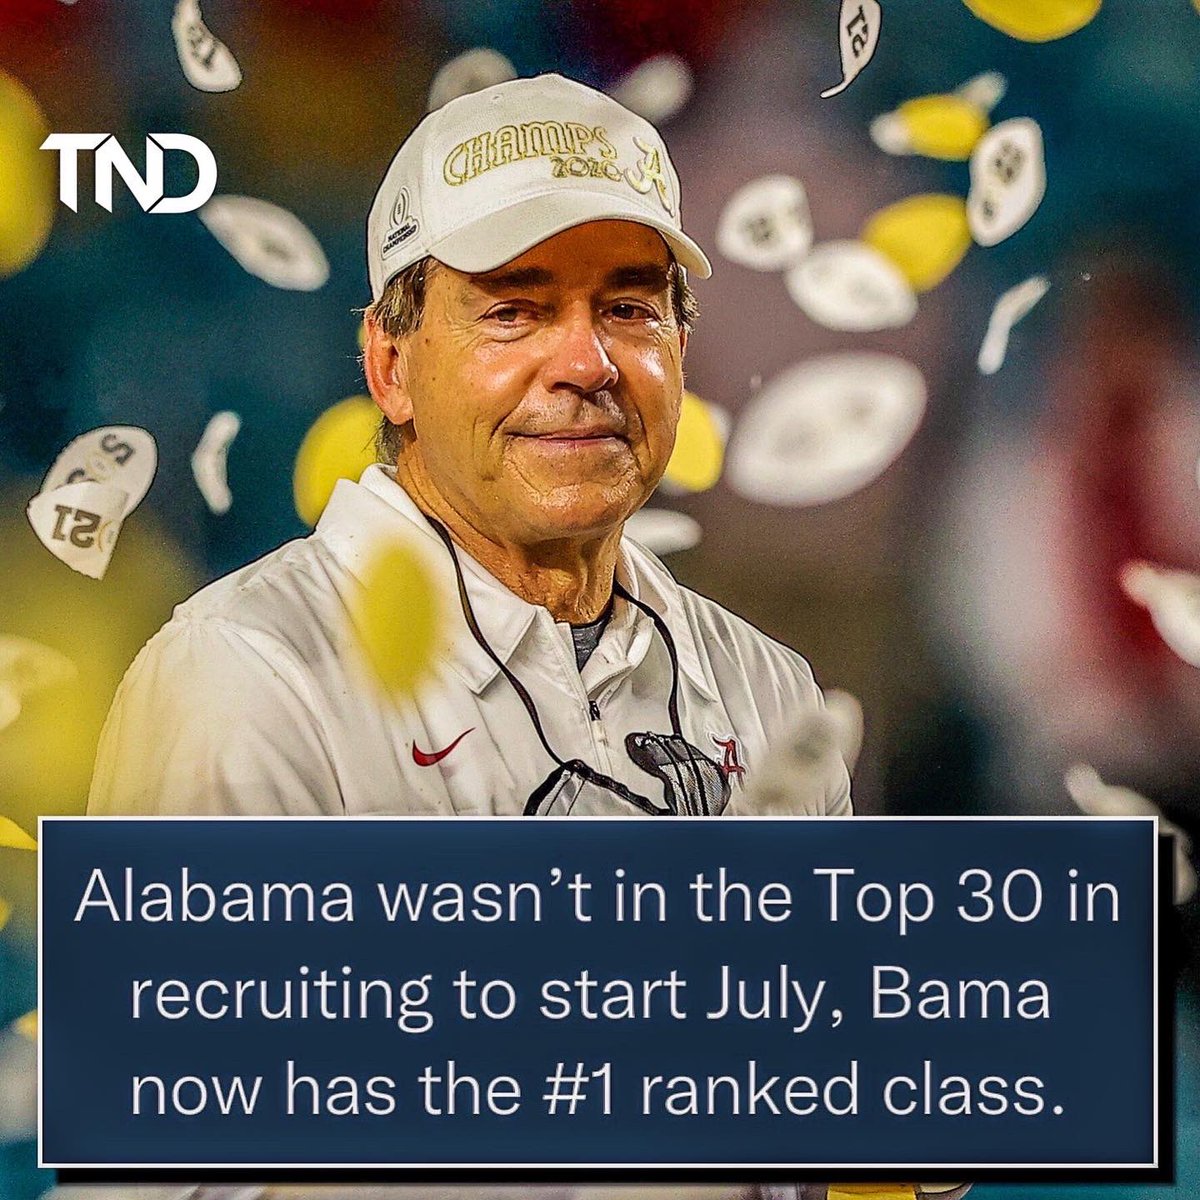 When in doubt, don’t doubt Nick Saban